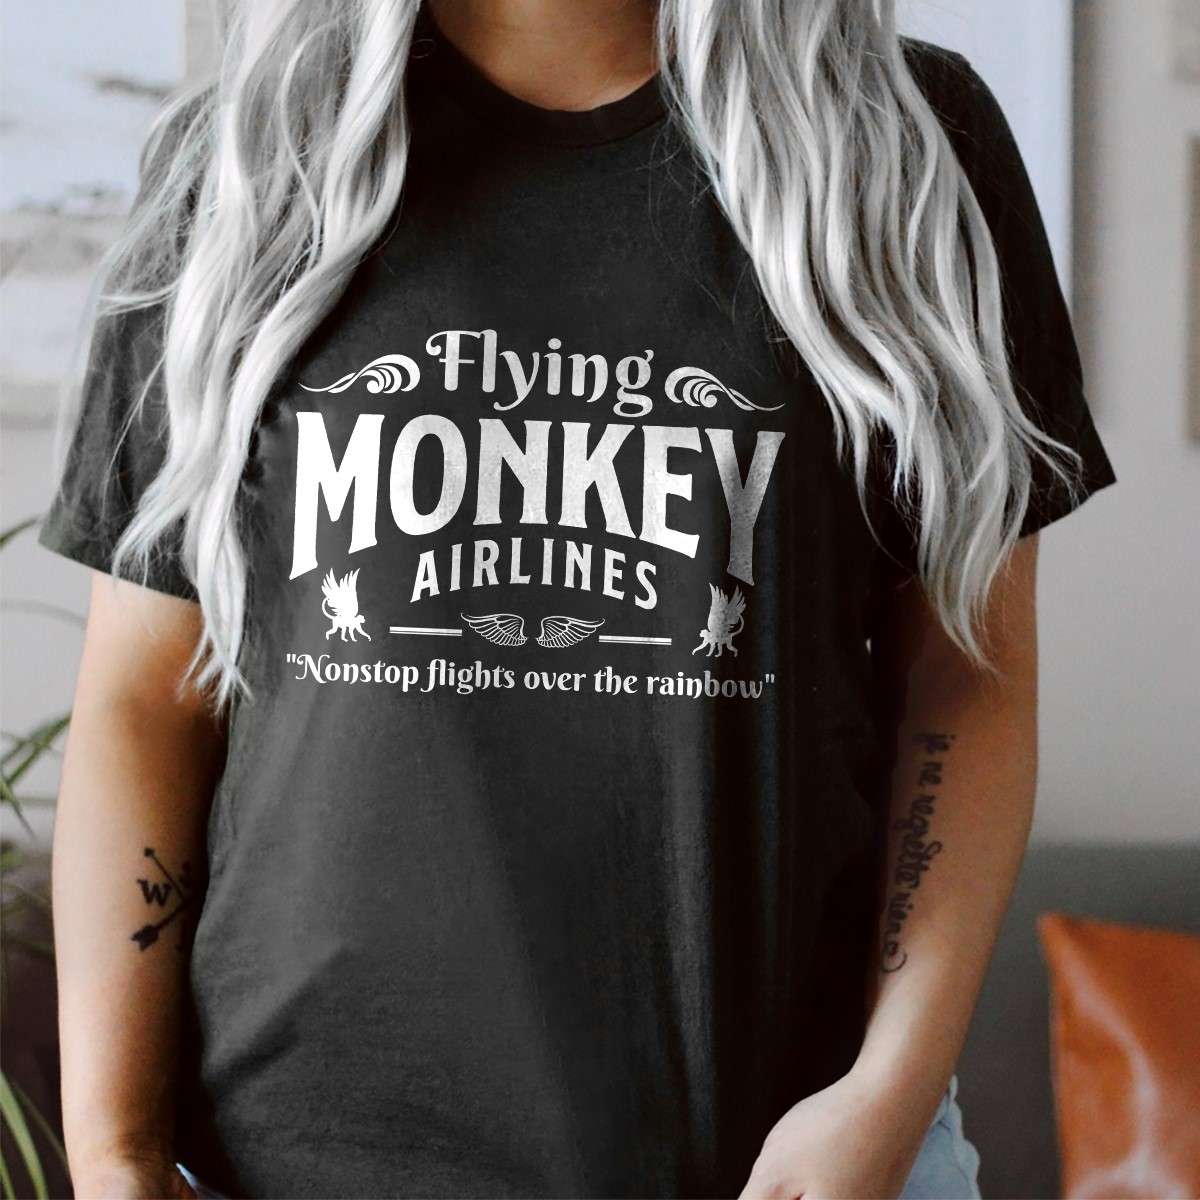 Flying monkey airlines nonstop flights over the rainbow